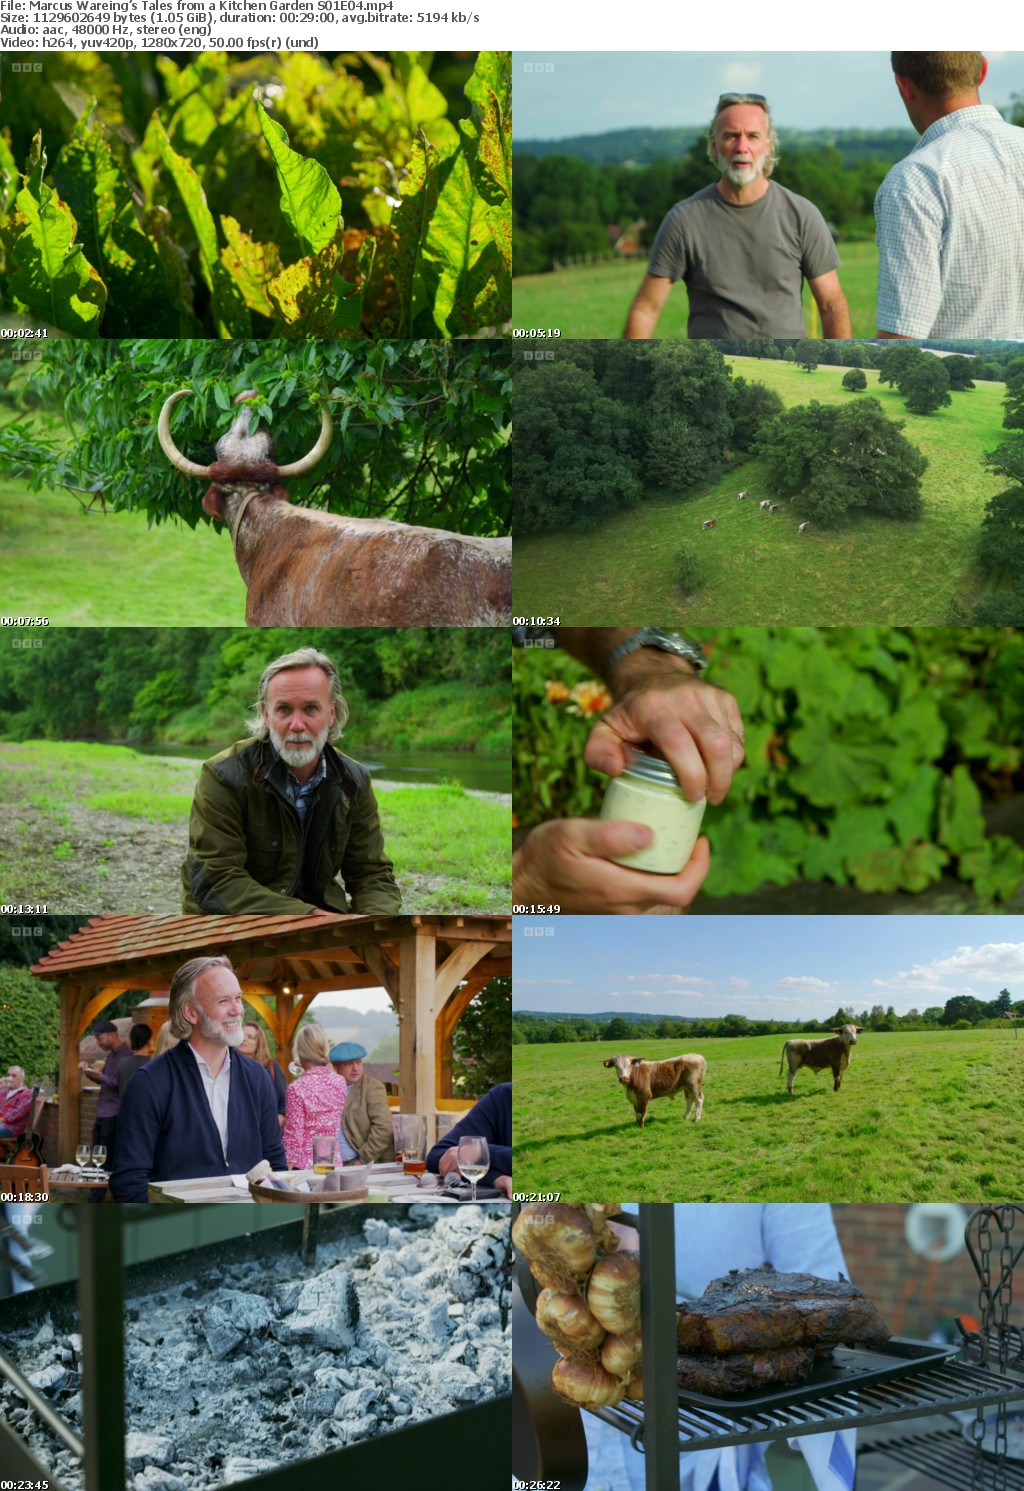 Marcus Wareings Tales from a Kitchen Garden S01E04 (1280x720p HD, 50fps, soft Eng subs)